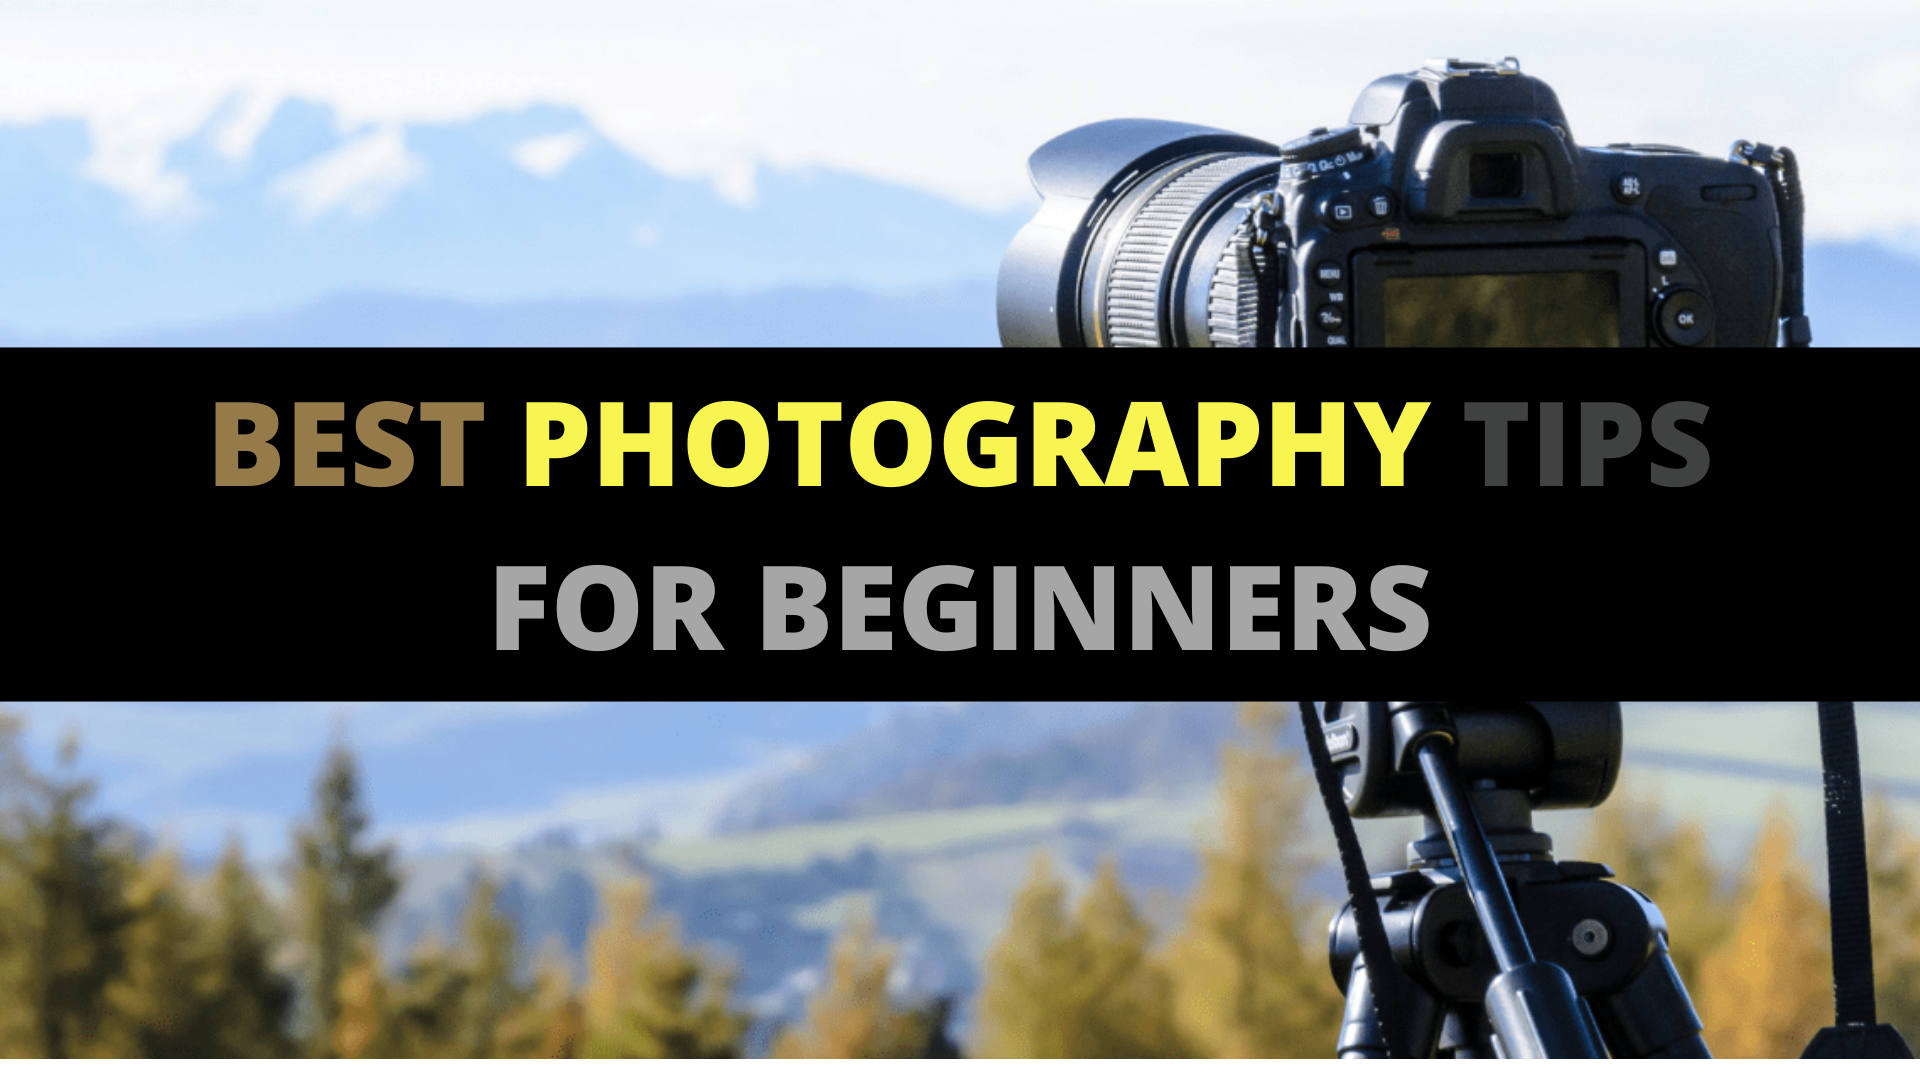 Top 5 Best Photography Tips For Beginners